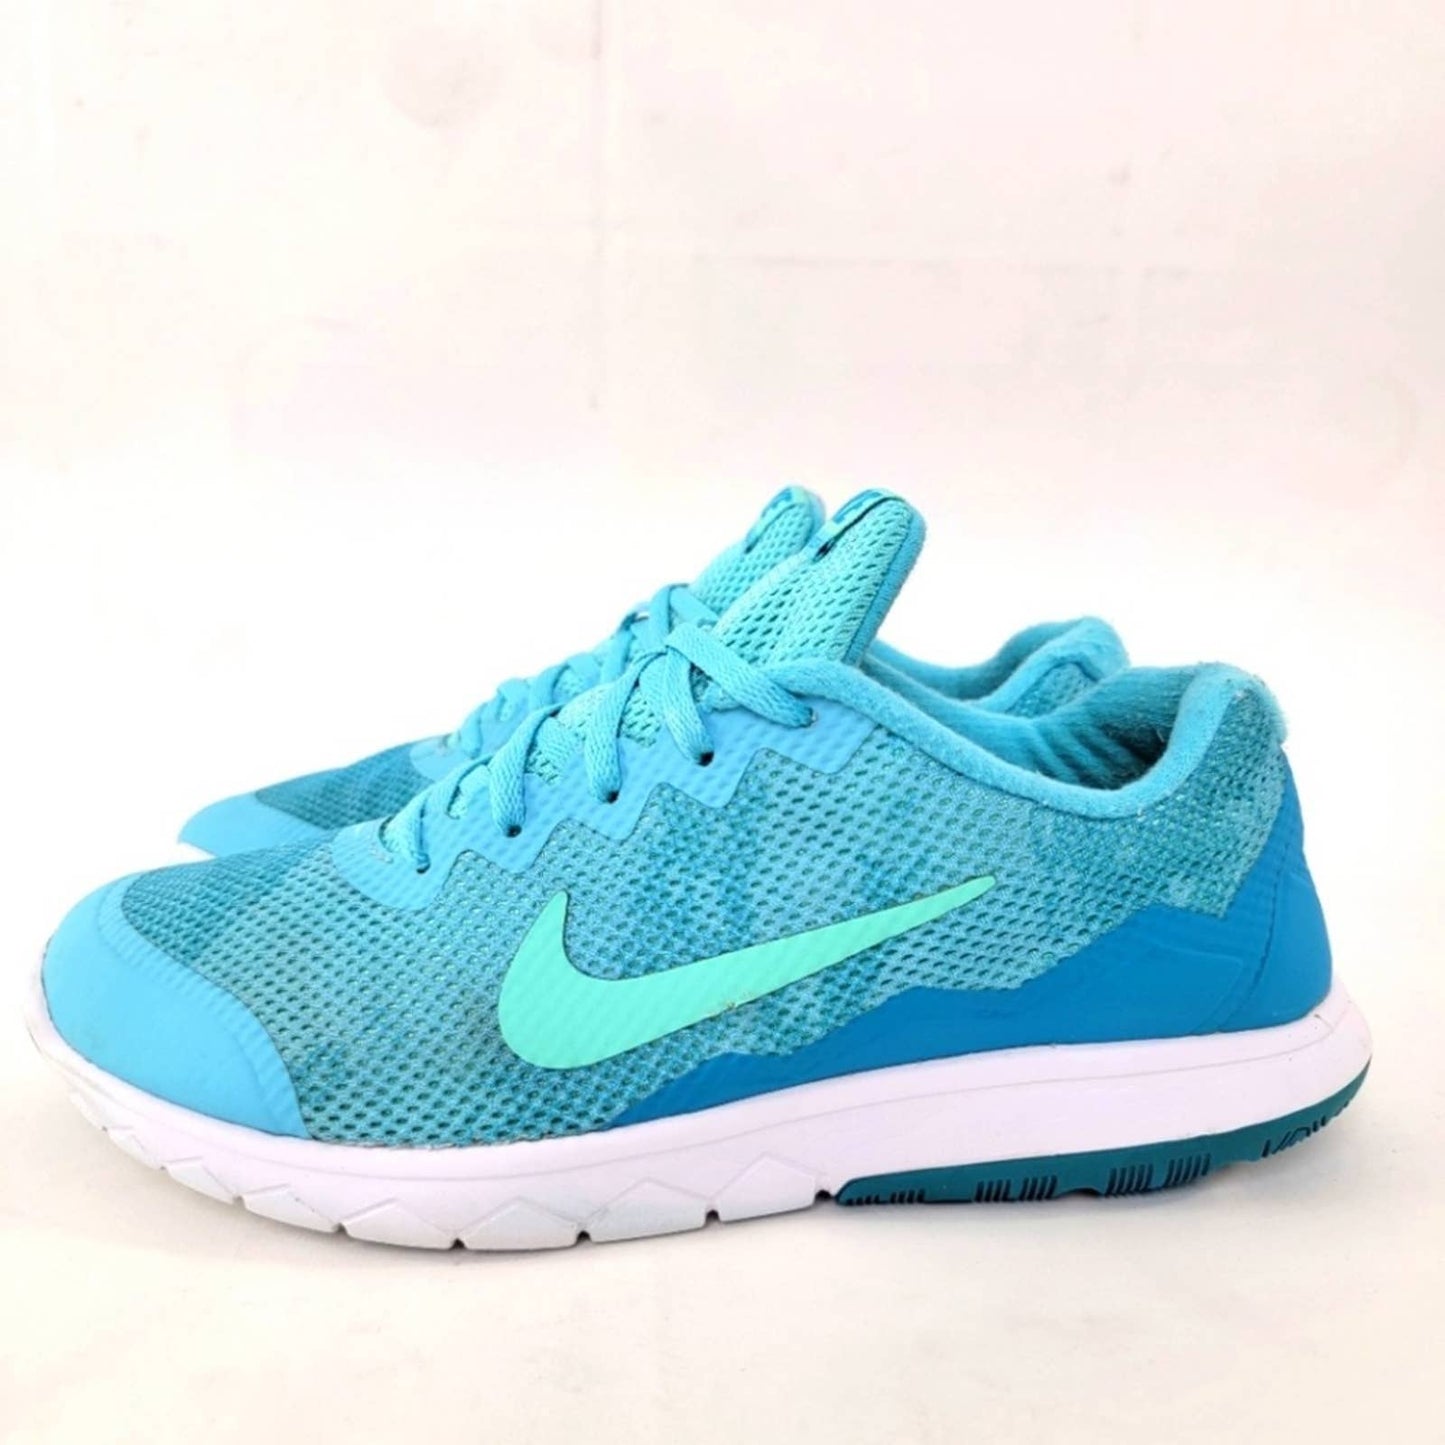 Nike Flex Experience RN 4 Running Shoes - 8